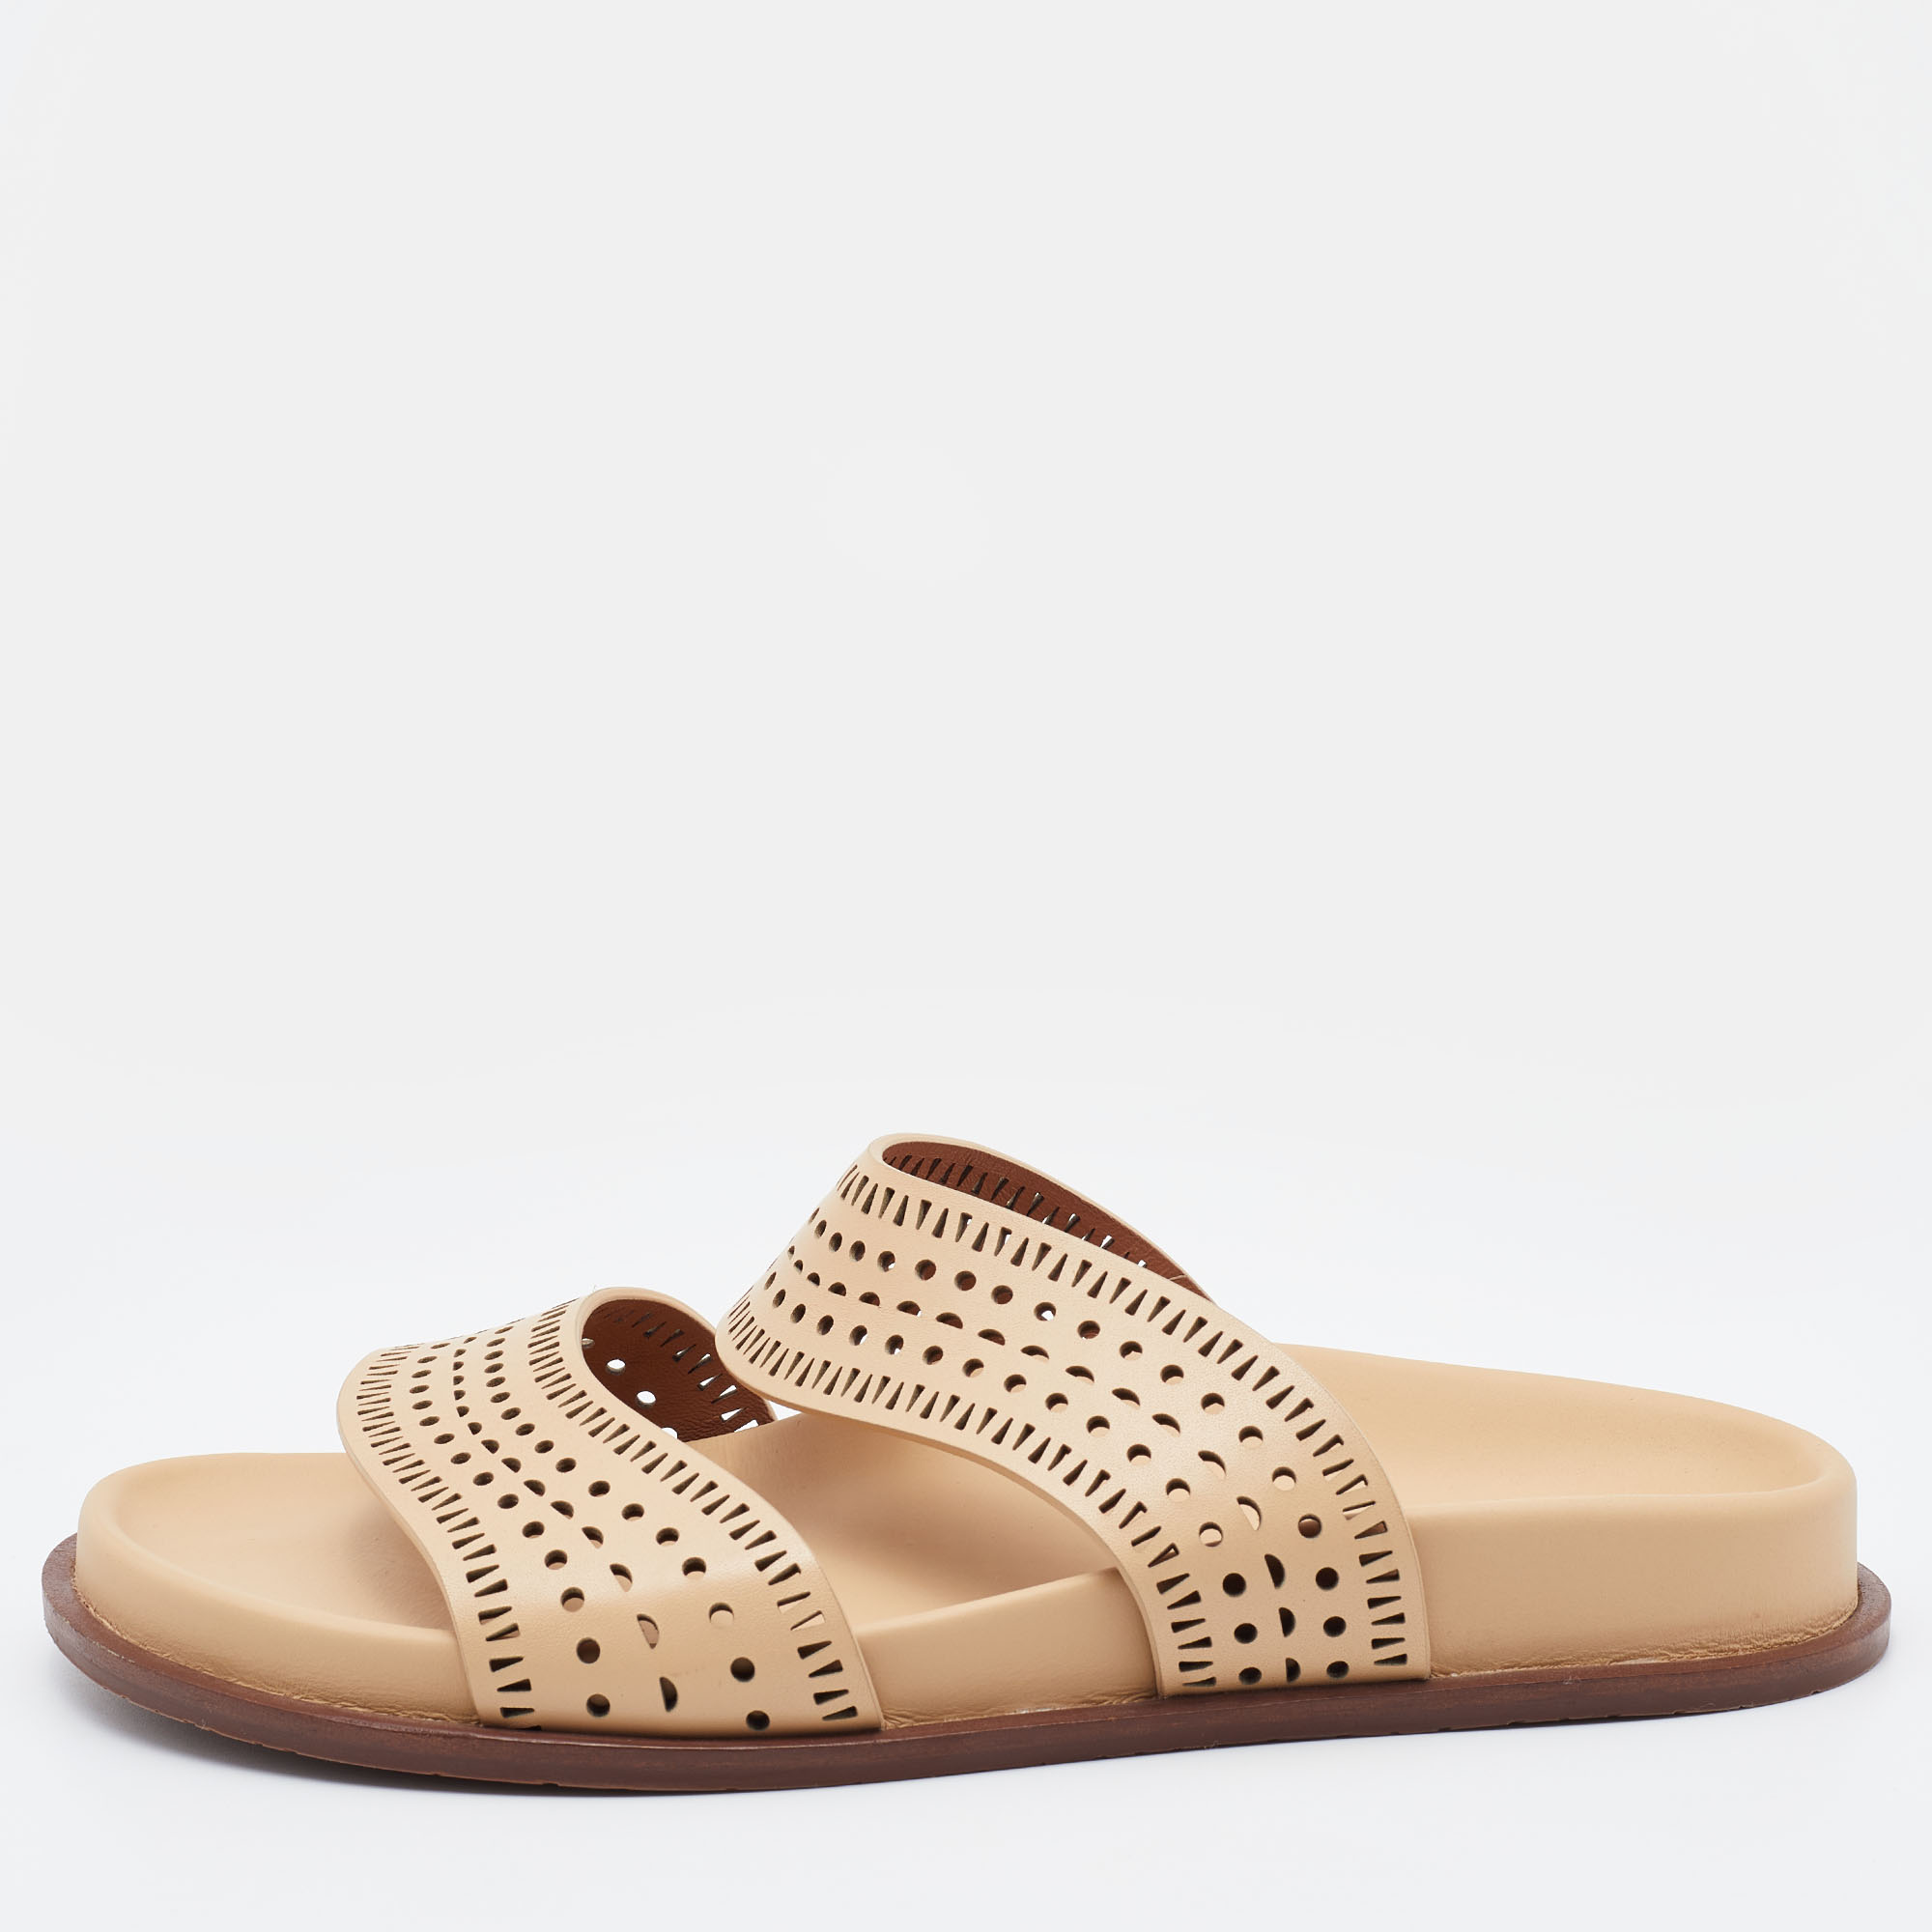 Pre-owned Alaïa Beige Perforated Leather Flat Slides Size 36.5